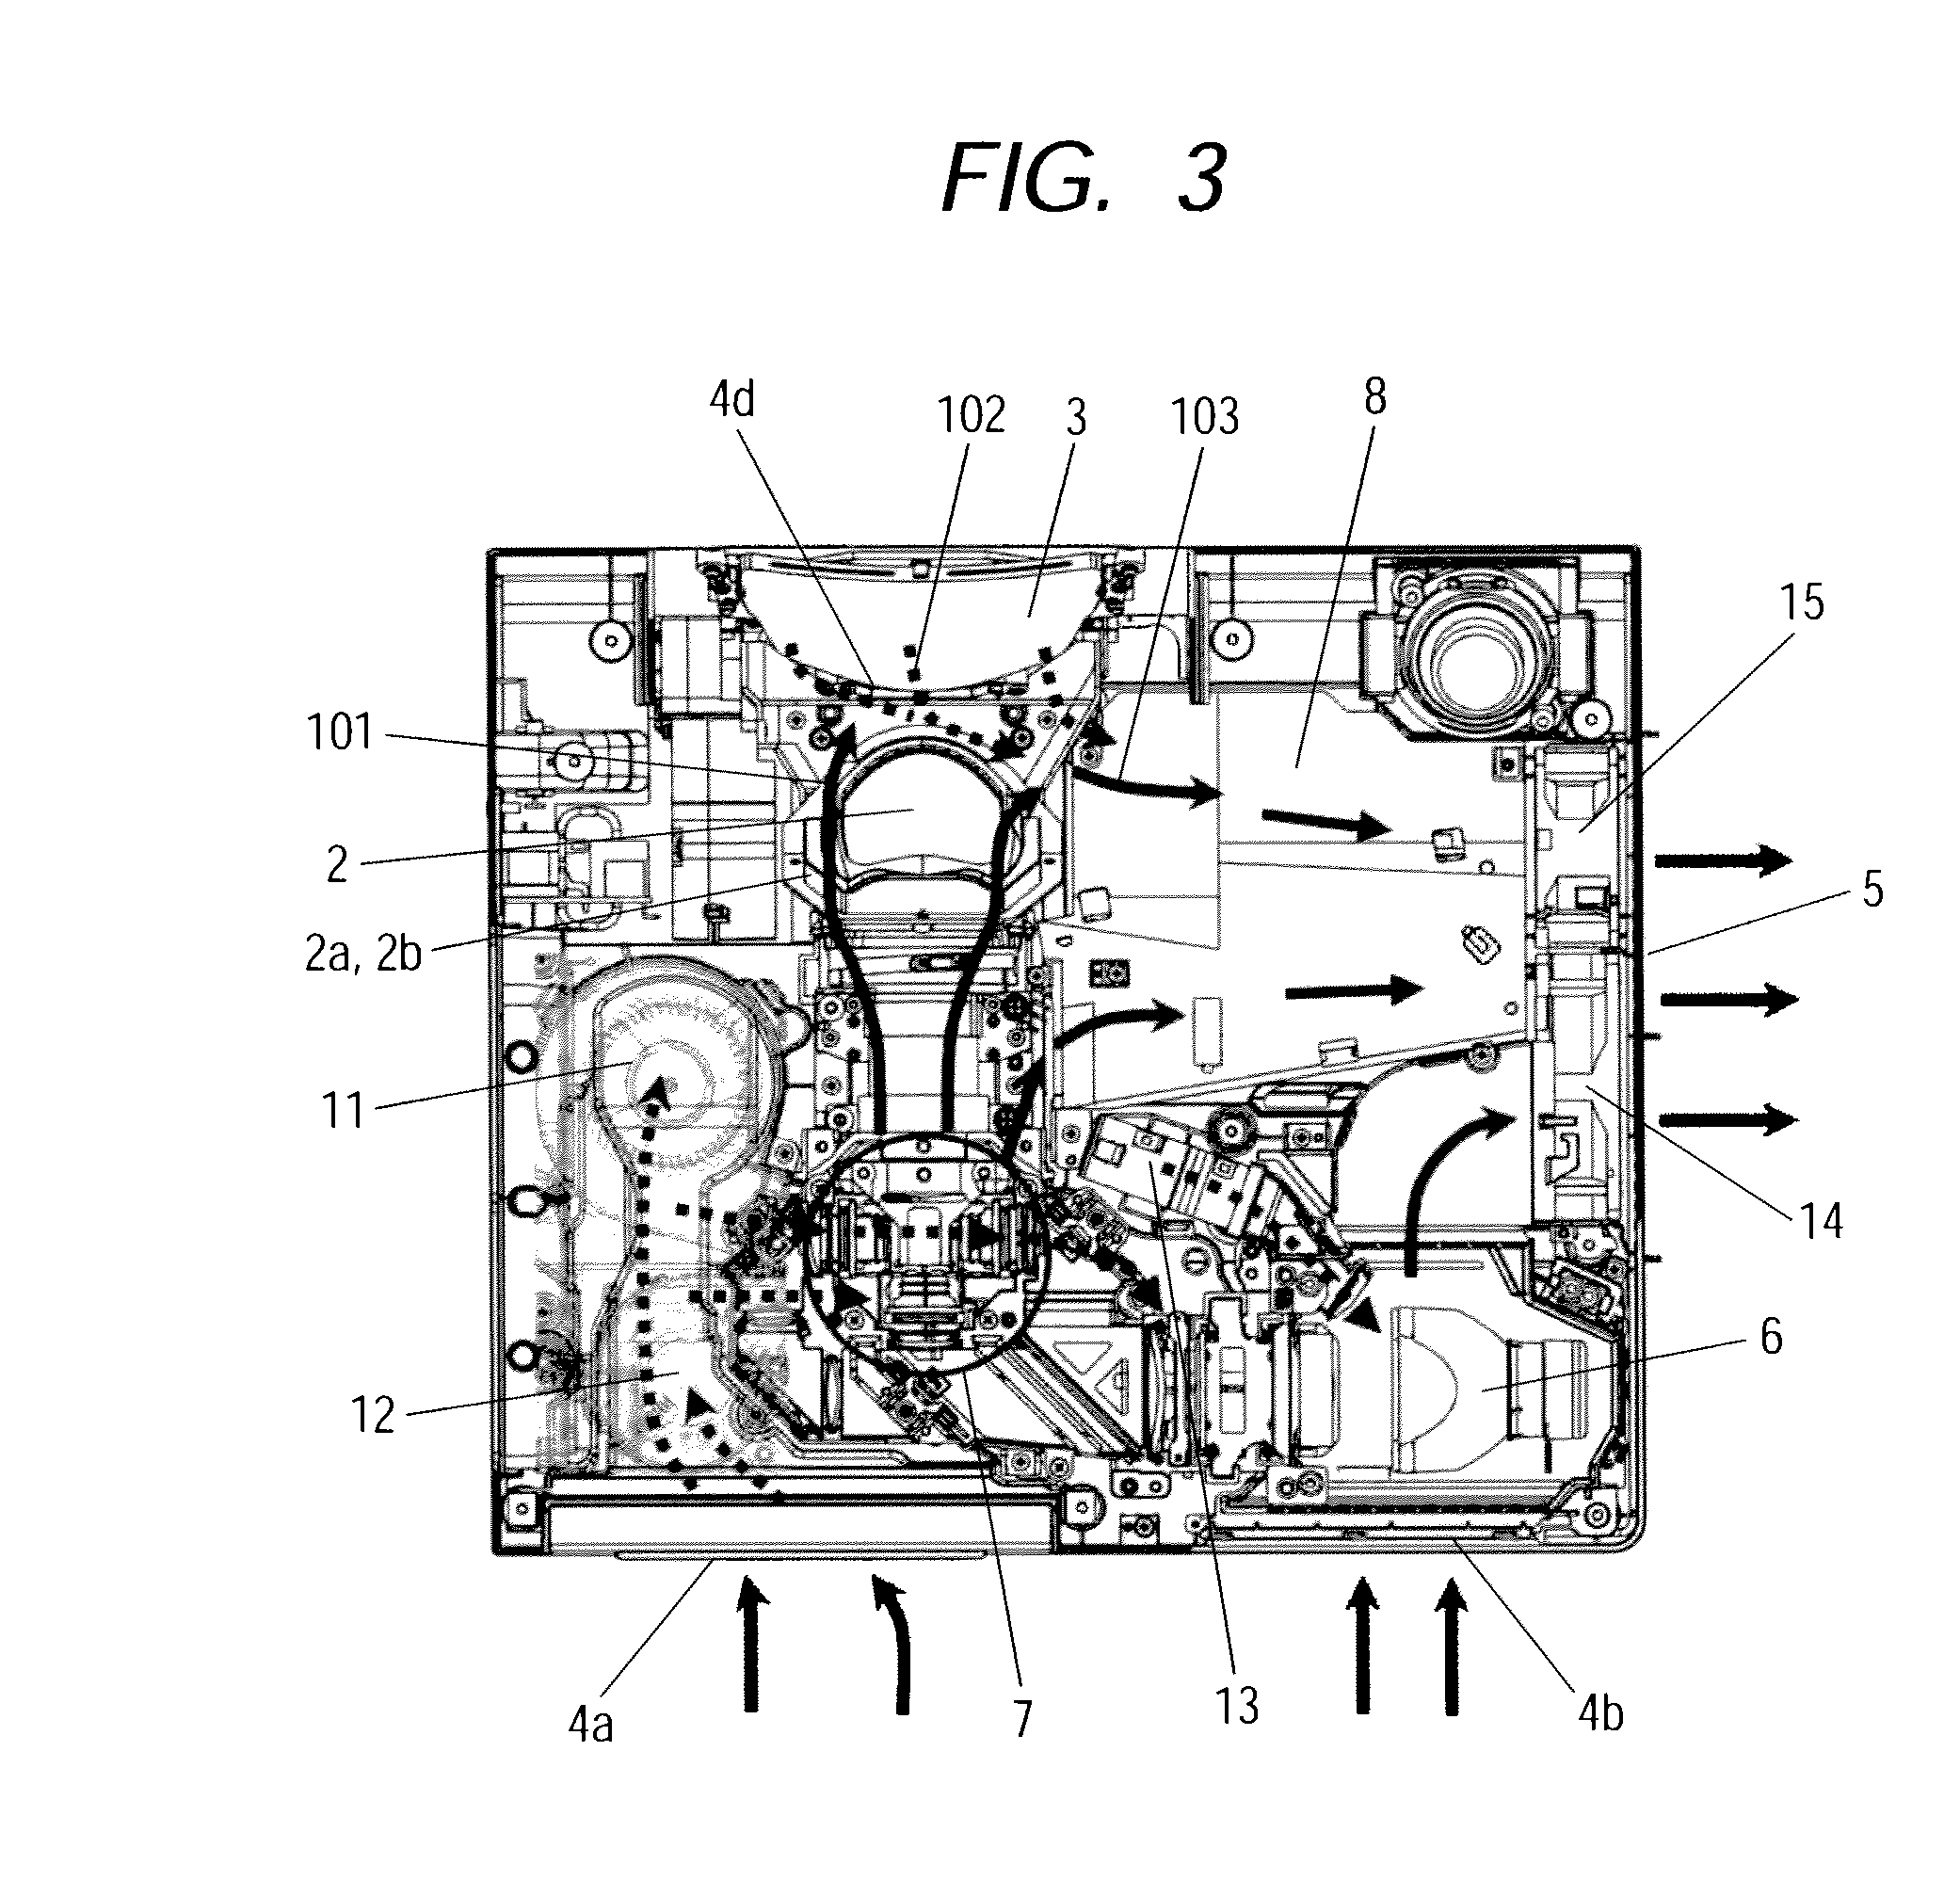 Projection image displaying device